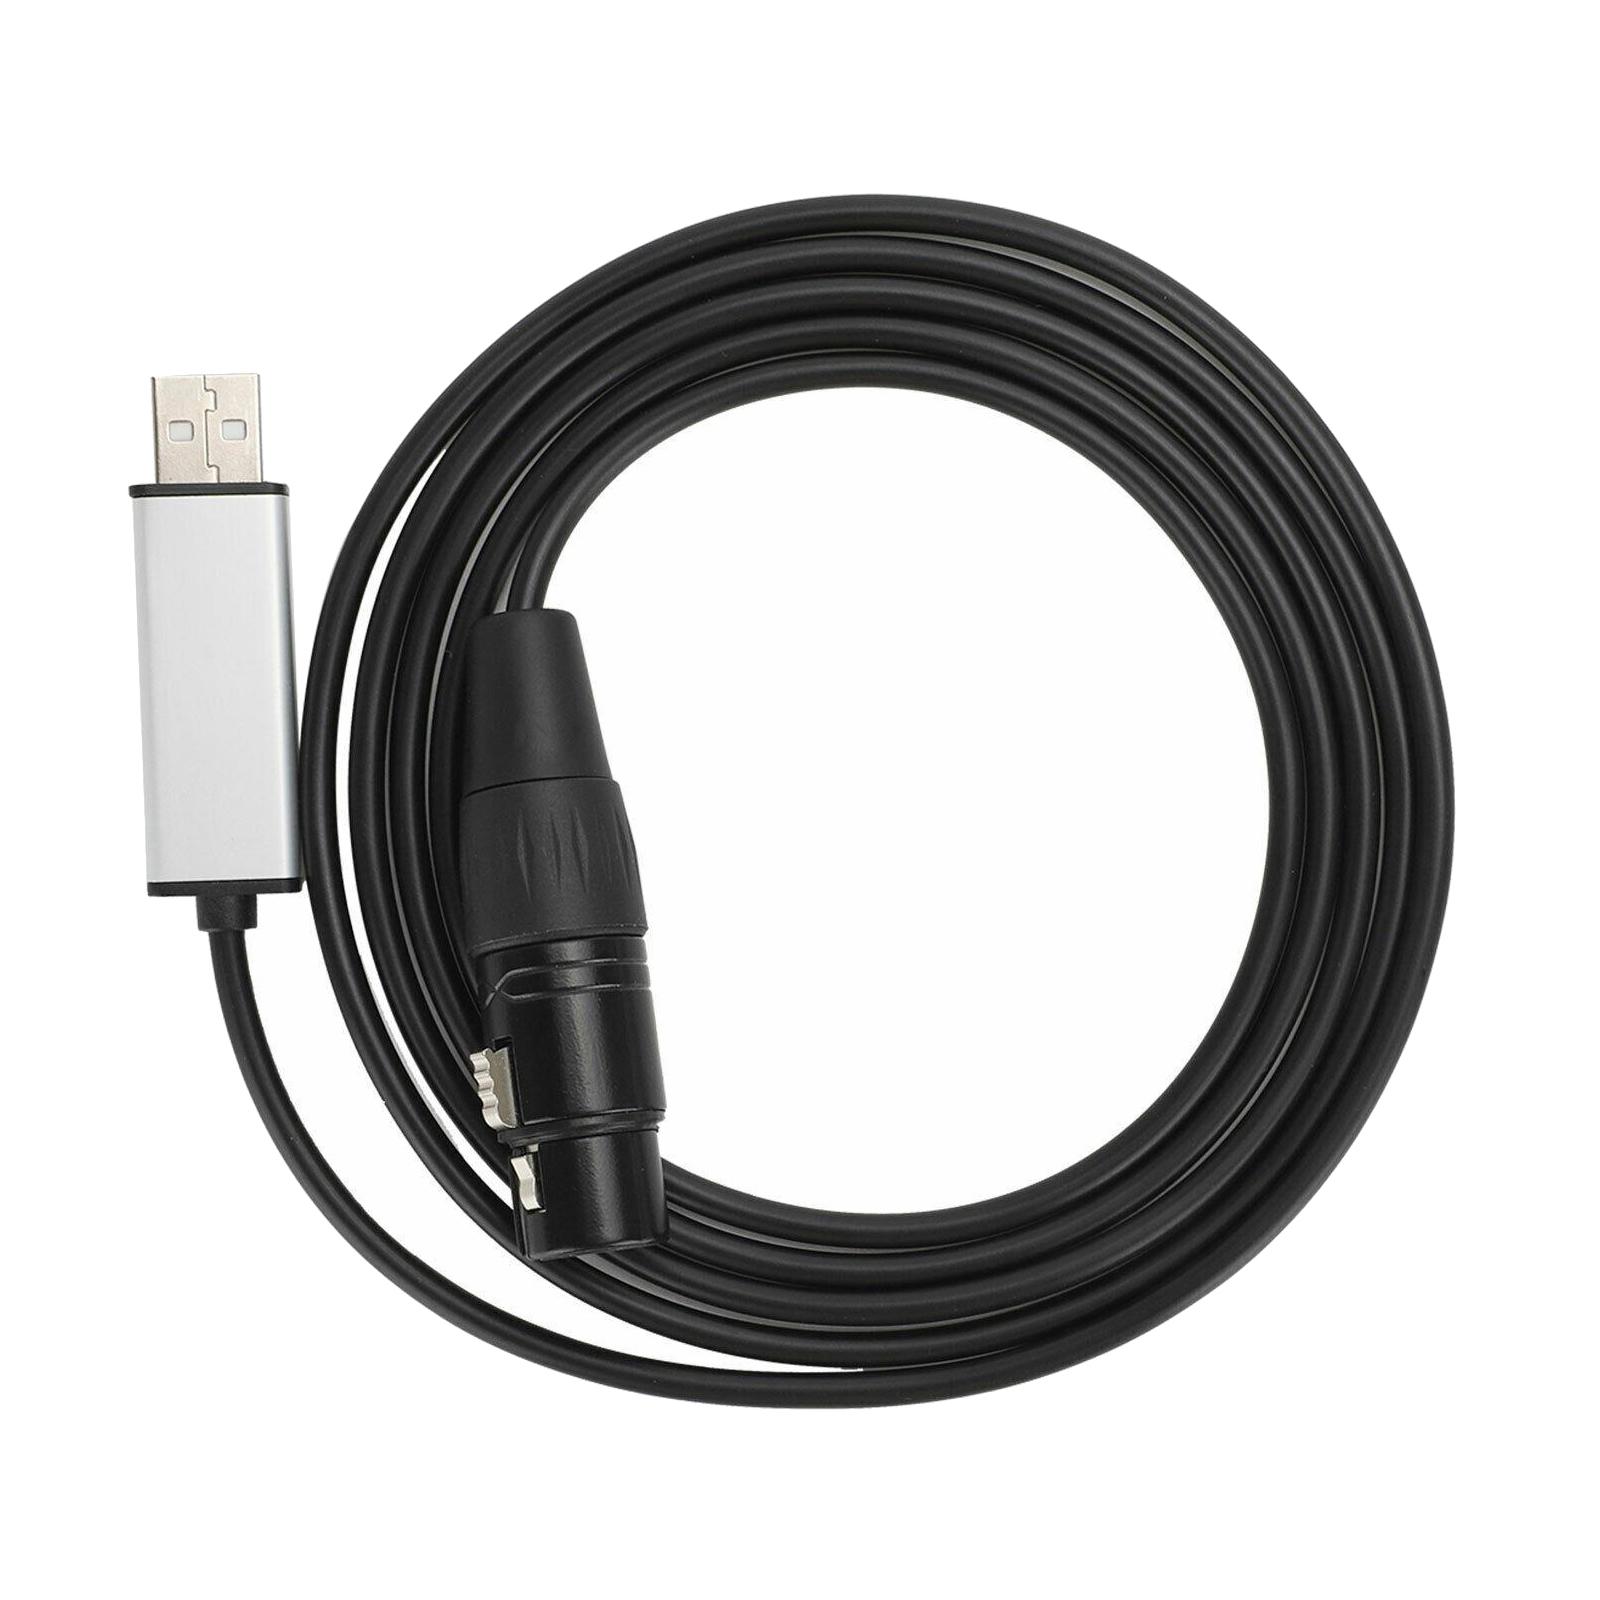 USB Cable XLR Female to USB Cord 3 Pins USB XLR Cable Converter Mic USB Cable USB XLR Female Connect Cord for Stage Instruments